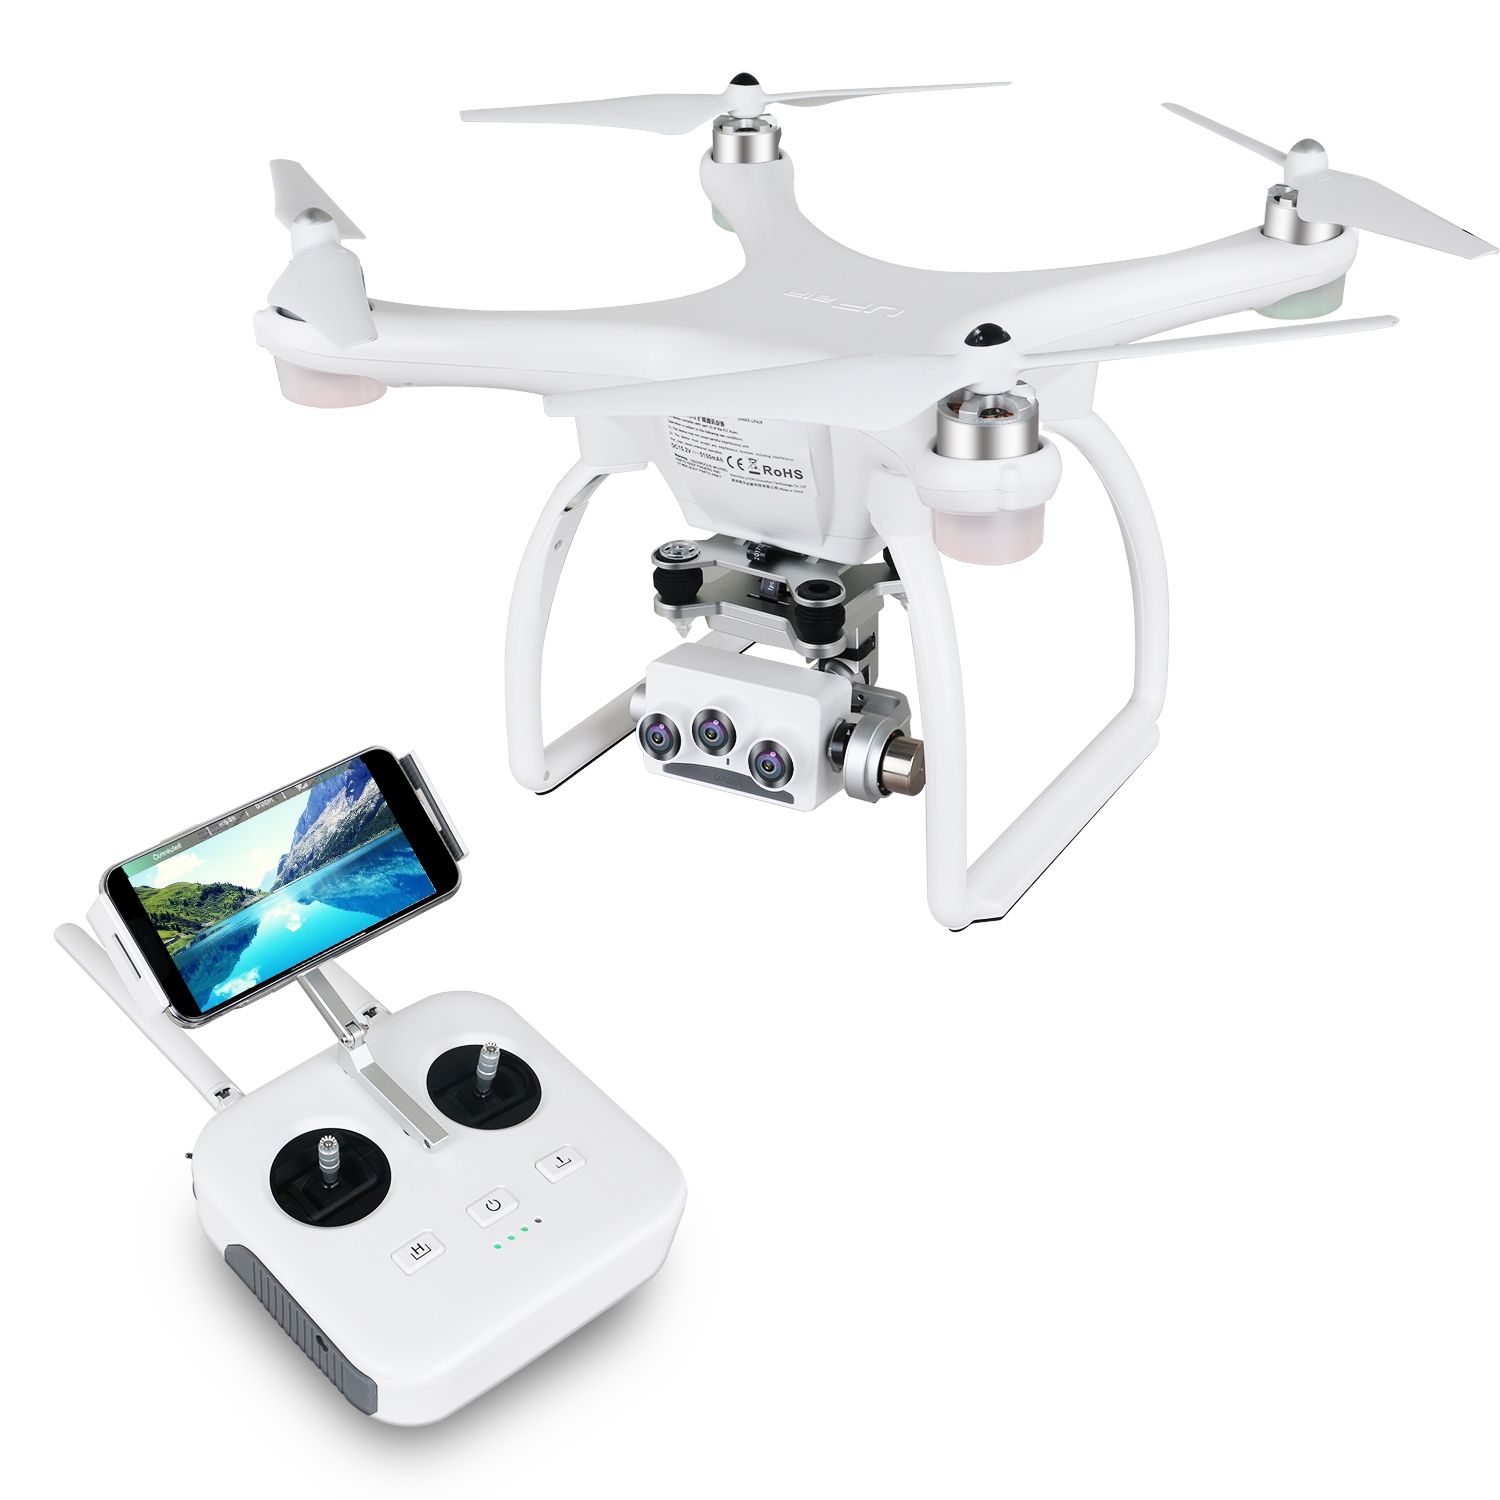 $539.1 for UPair 2 Ultrasonic 5.8G 1KM FPV 3D + 4K + 16MP Camera With 3 Axis Gimbal GPS RC Quadcopter Drone RTF